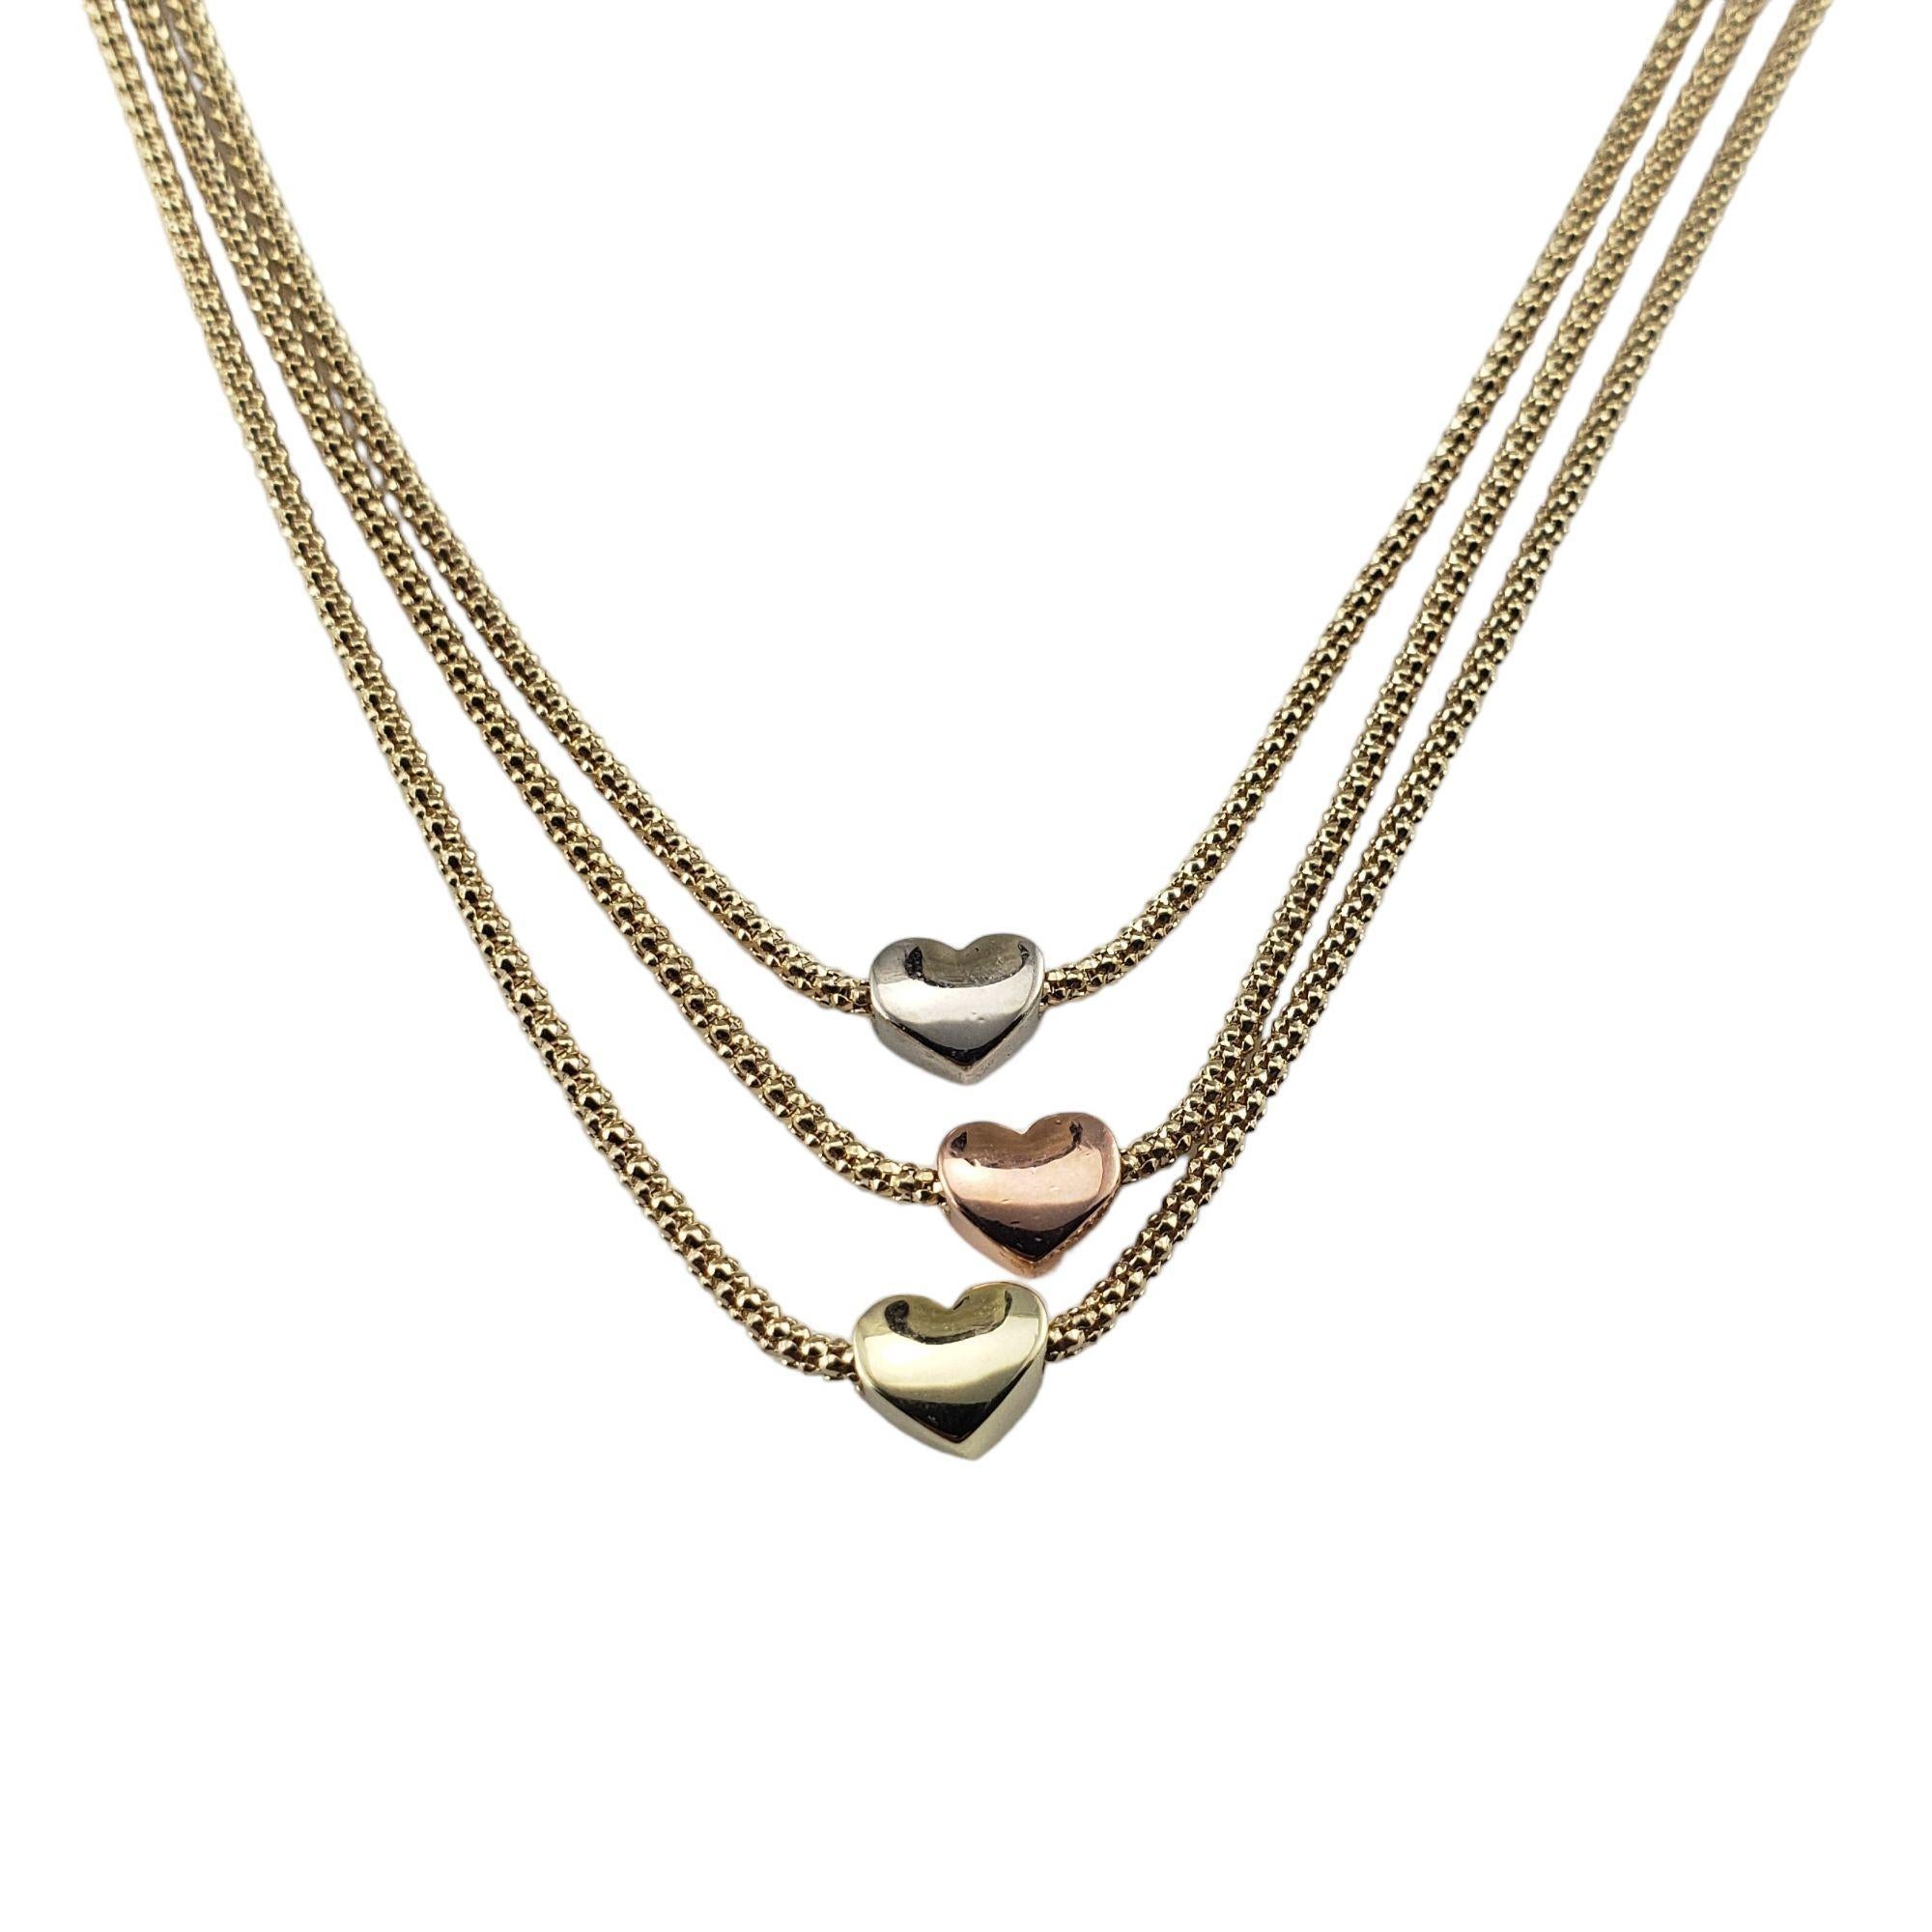  14 Karat Yellow, White and Rose Gold Heart Triple Row Layered Necklace-

This stunning triple row layered necklace features three hearts crafted in 14K yellow, white and rose gold. Set on three yellow gold wheat chains.

Size: 16.5